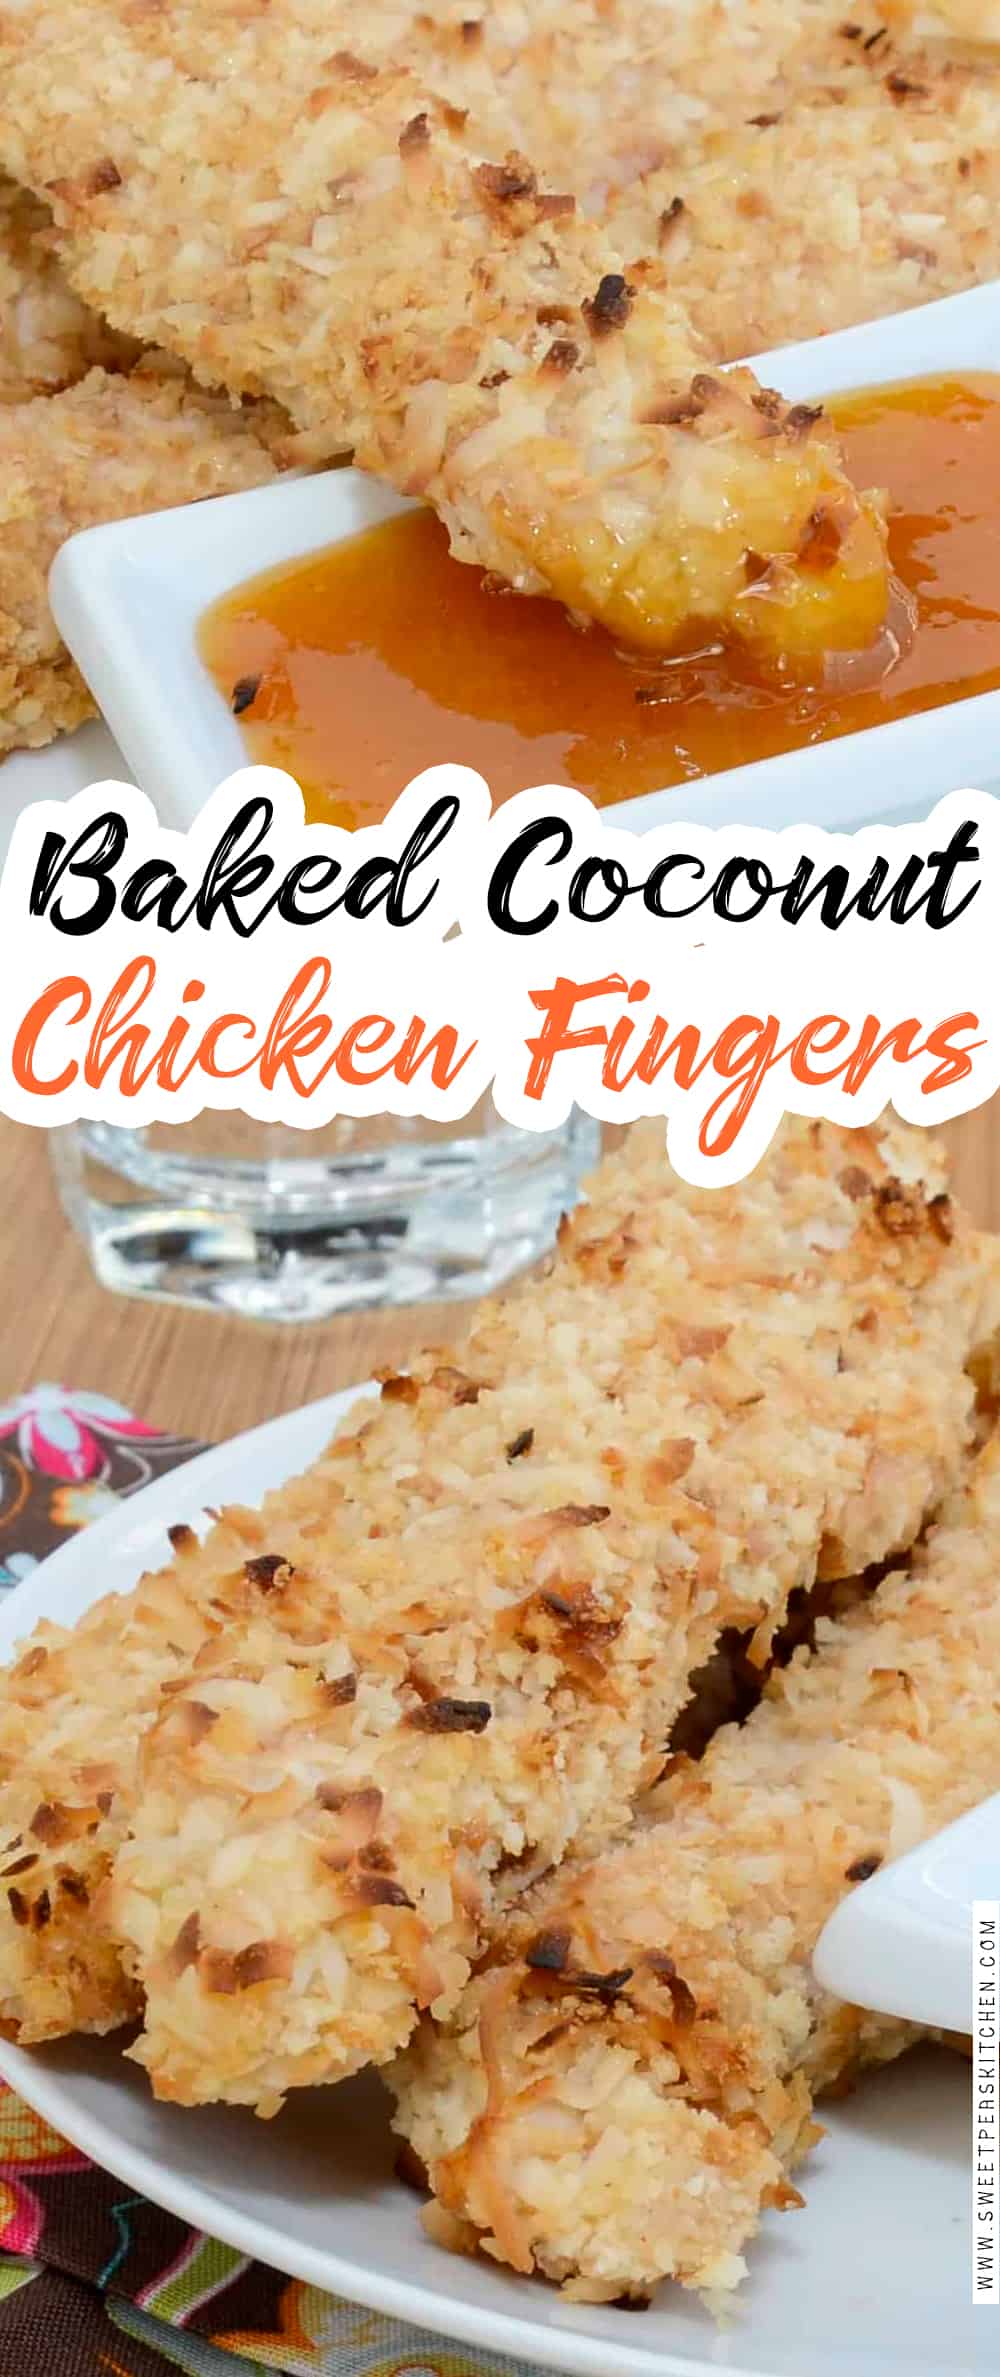 Baked Coconut Chicken Fingers